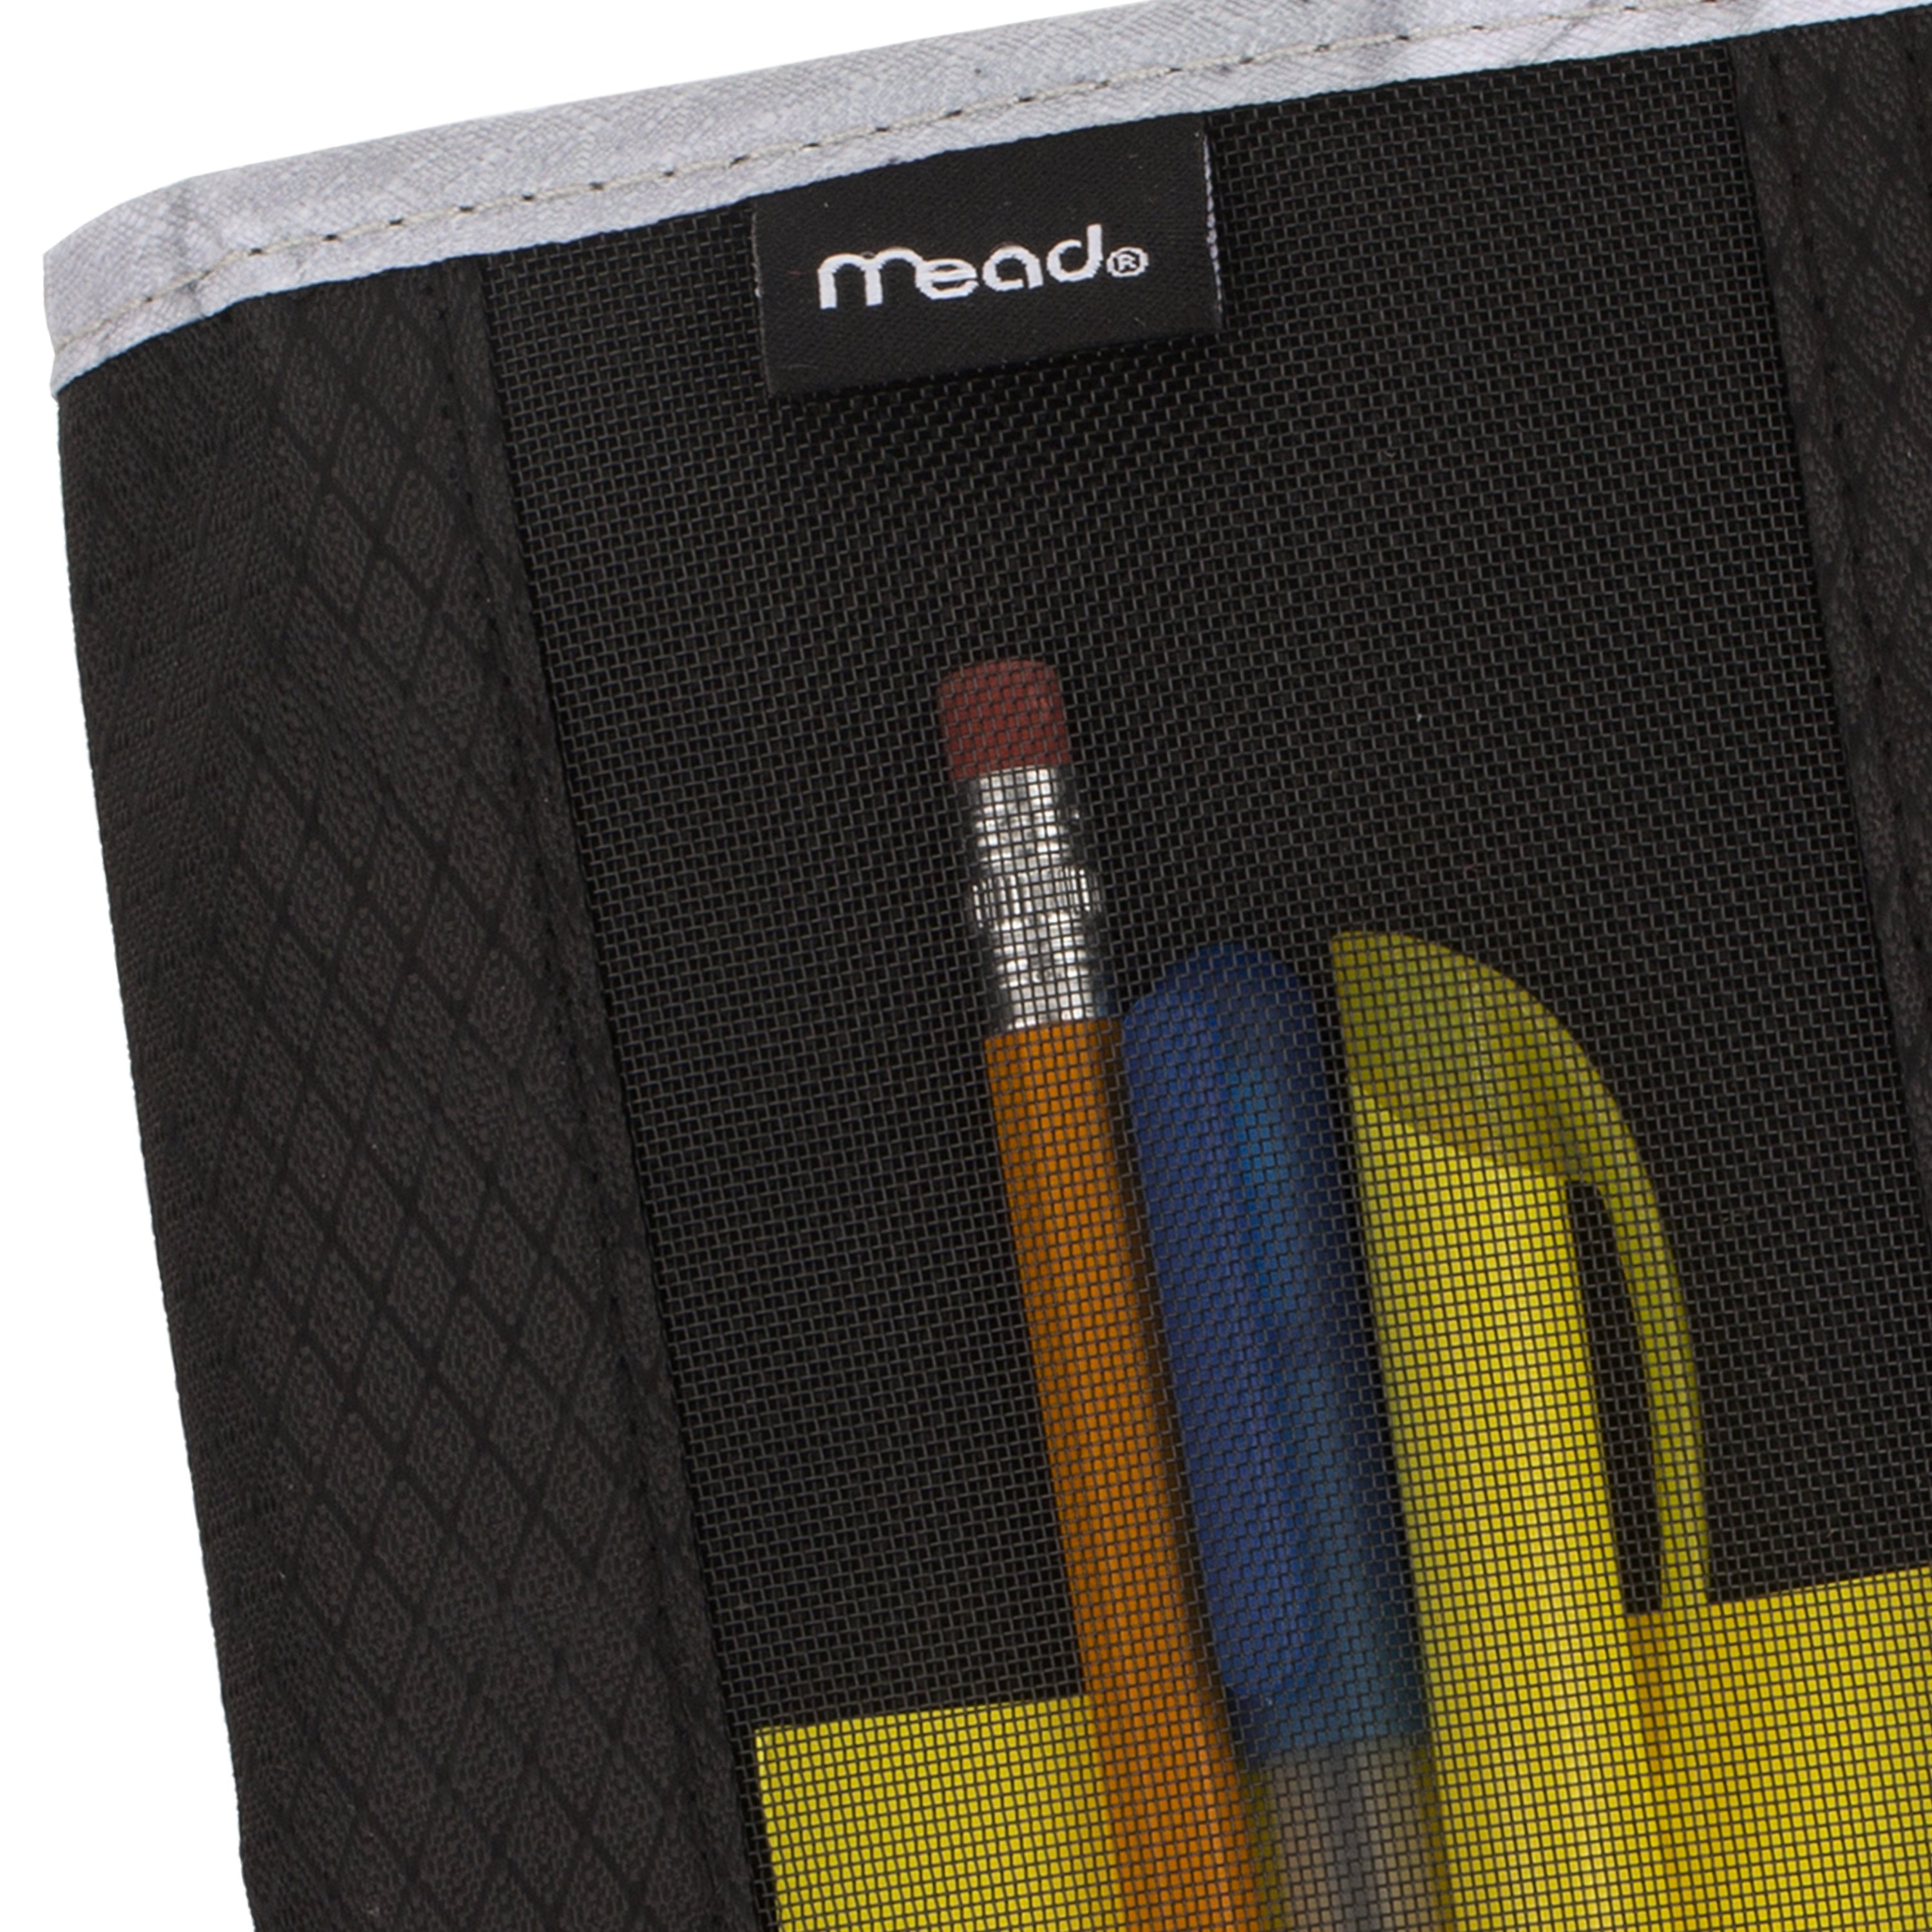 Xpanz Carrying Case (Pouch) Pencil by ACCO Brands Corporation MEA50206